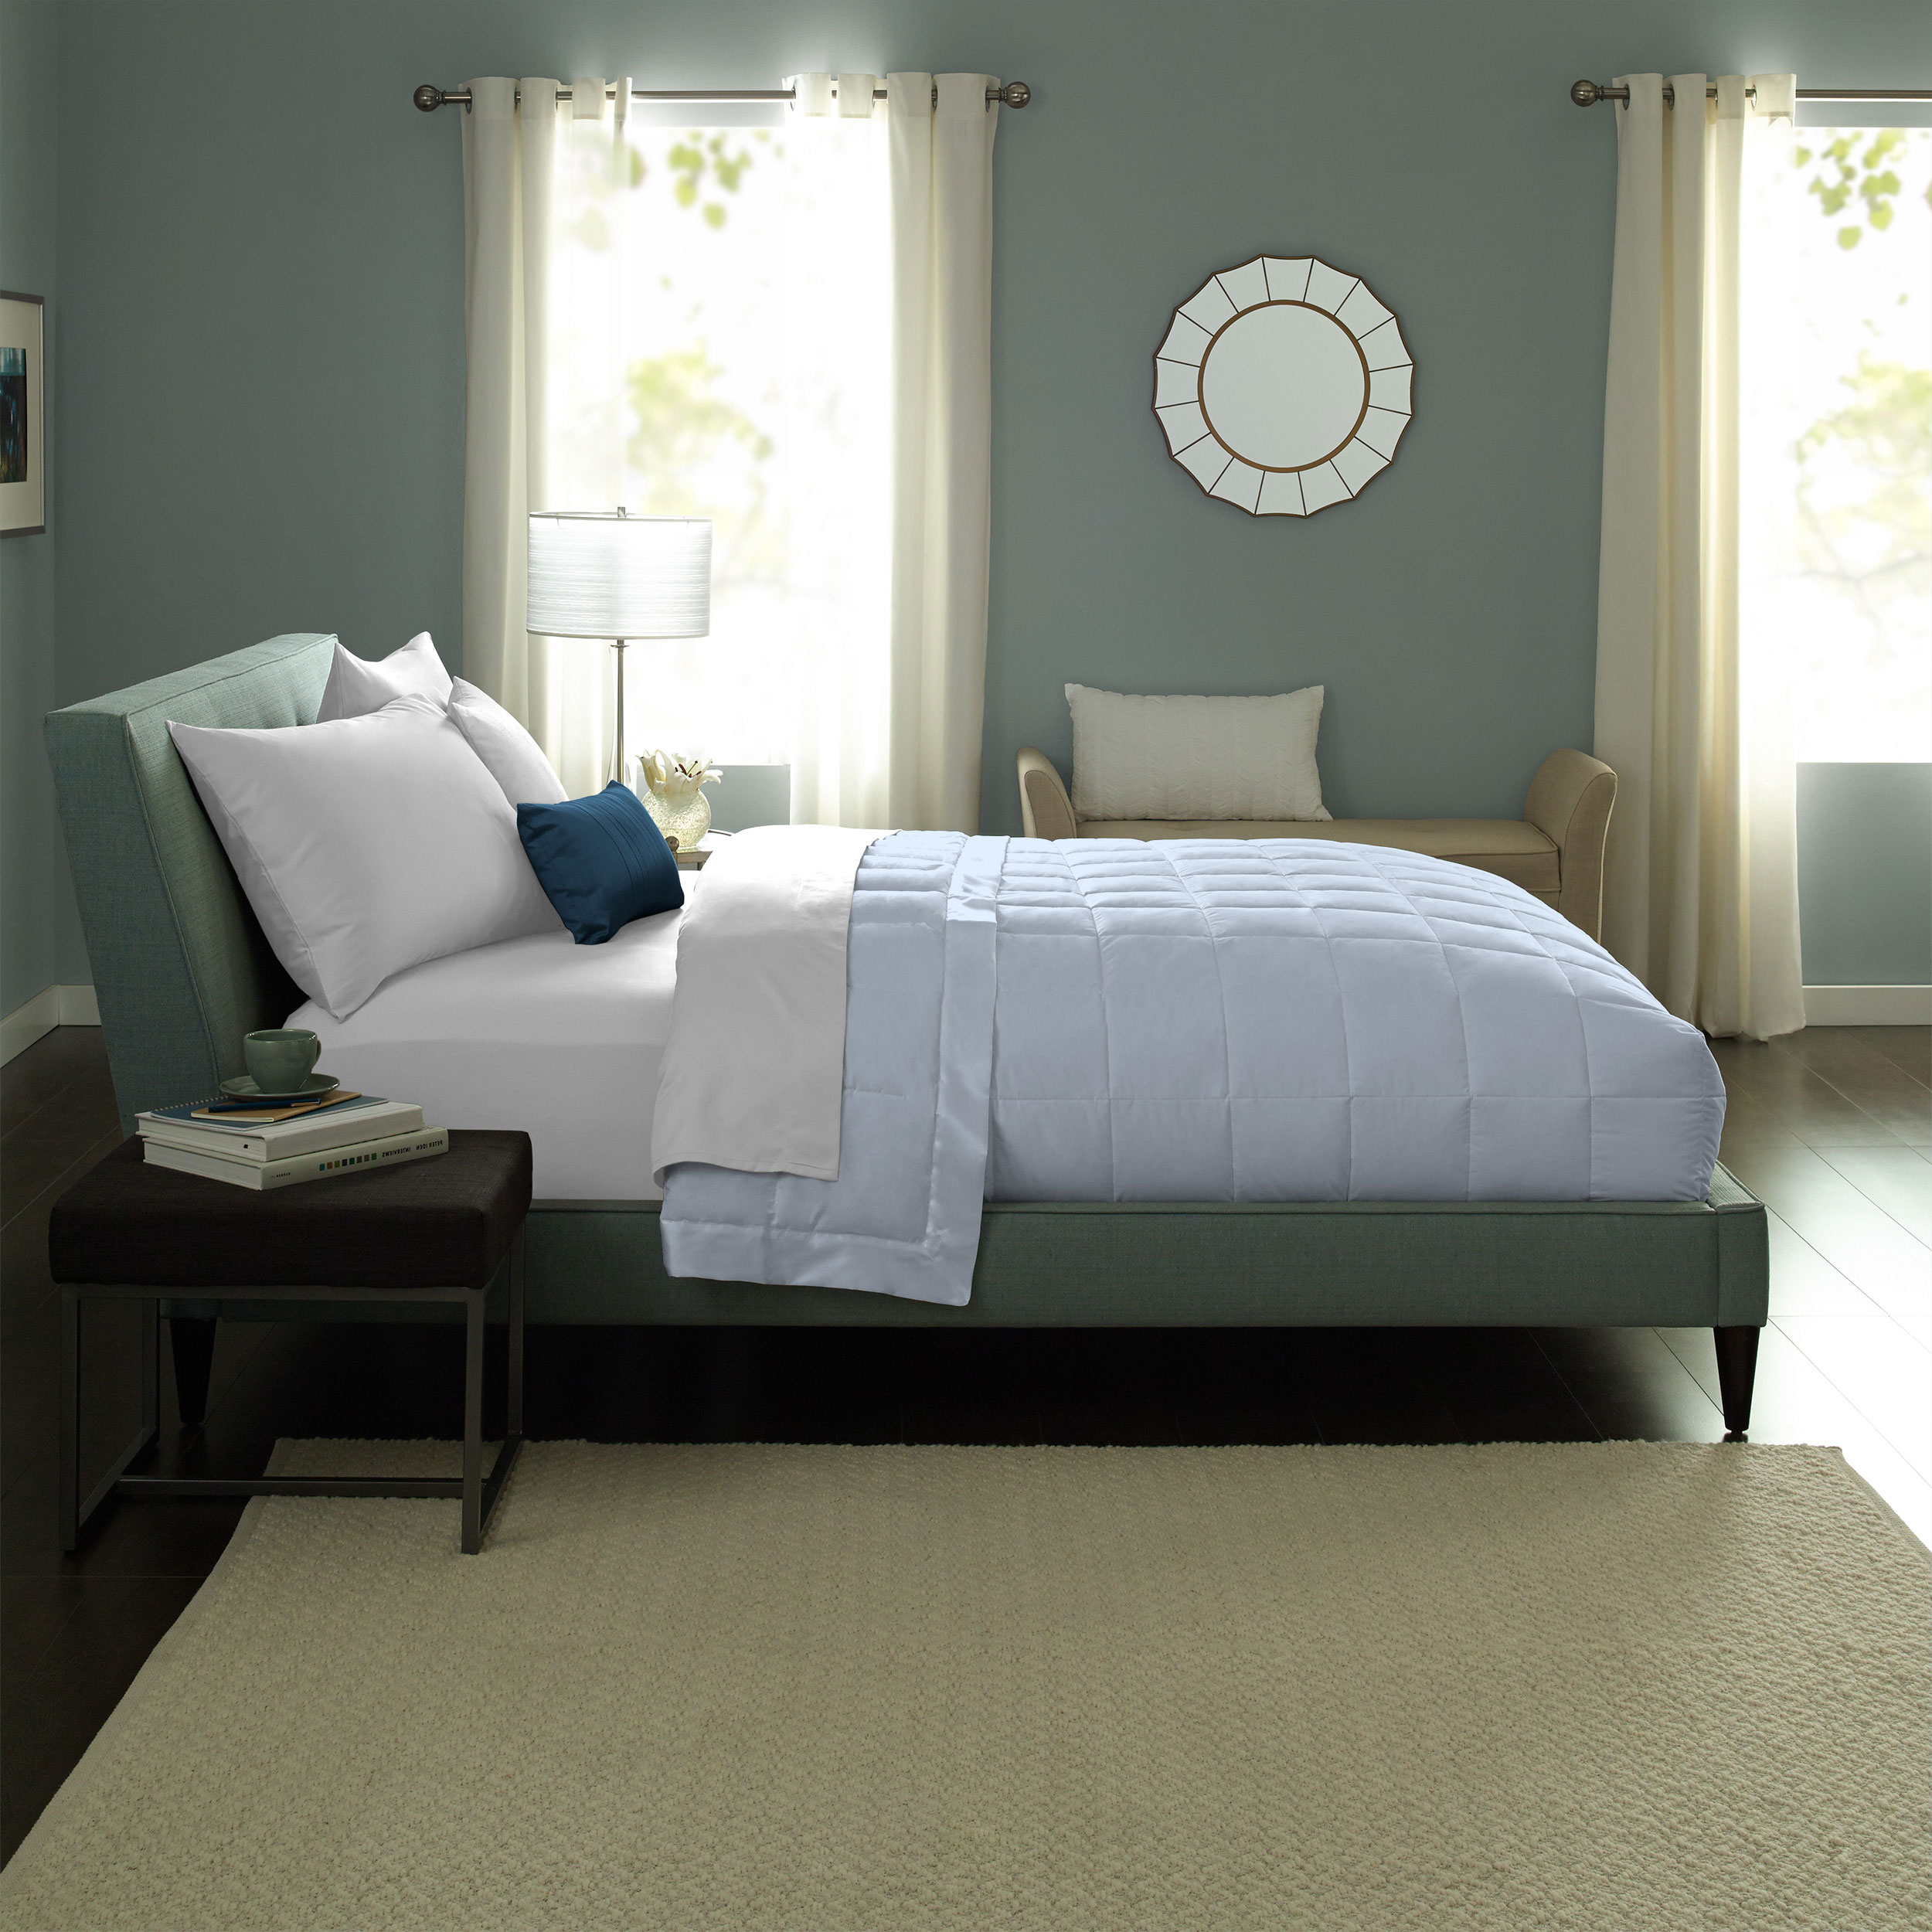 Pacific Coast Blue Down Blanket 230 Thread Count Resilia Feathers 550 Fill Power Down - Queen